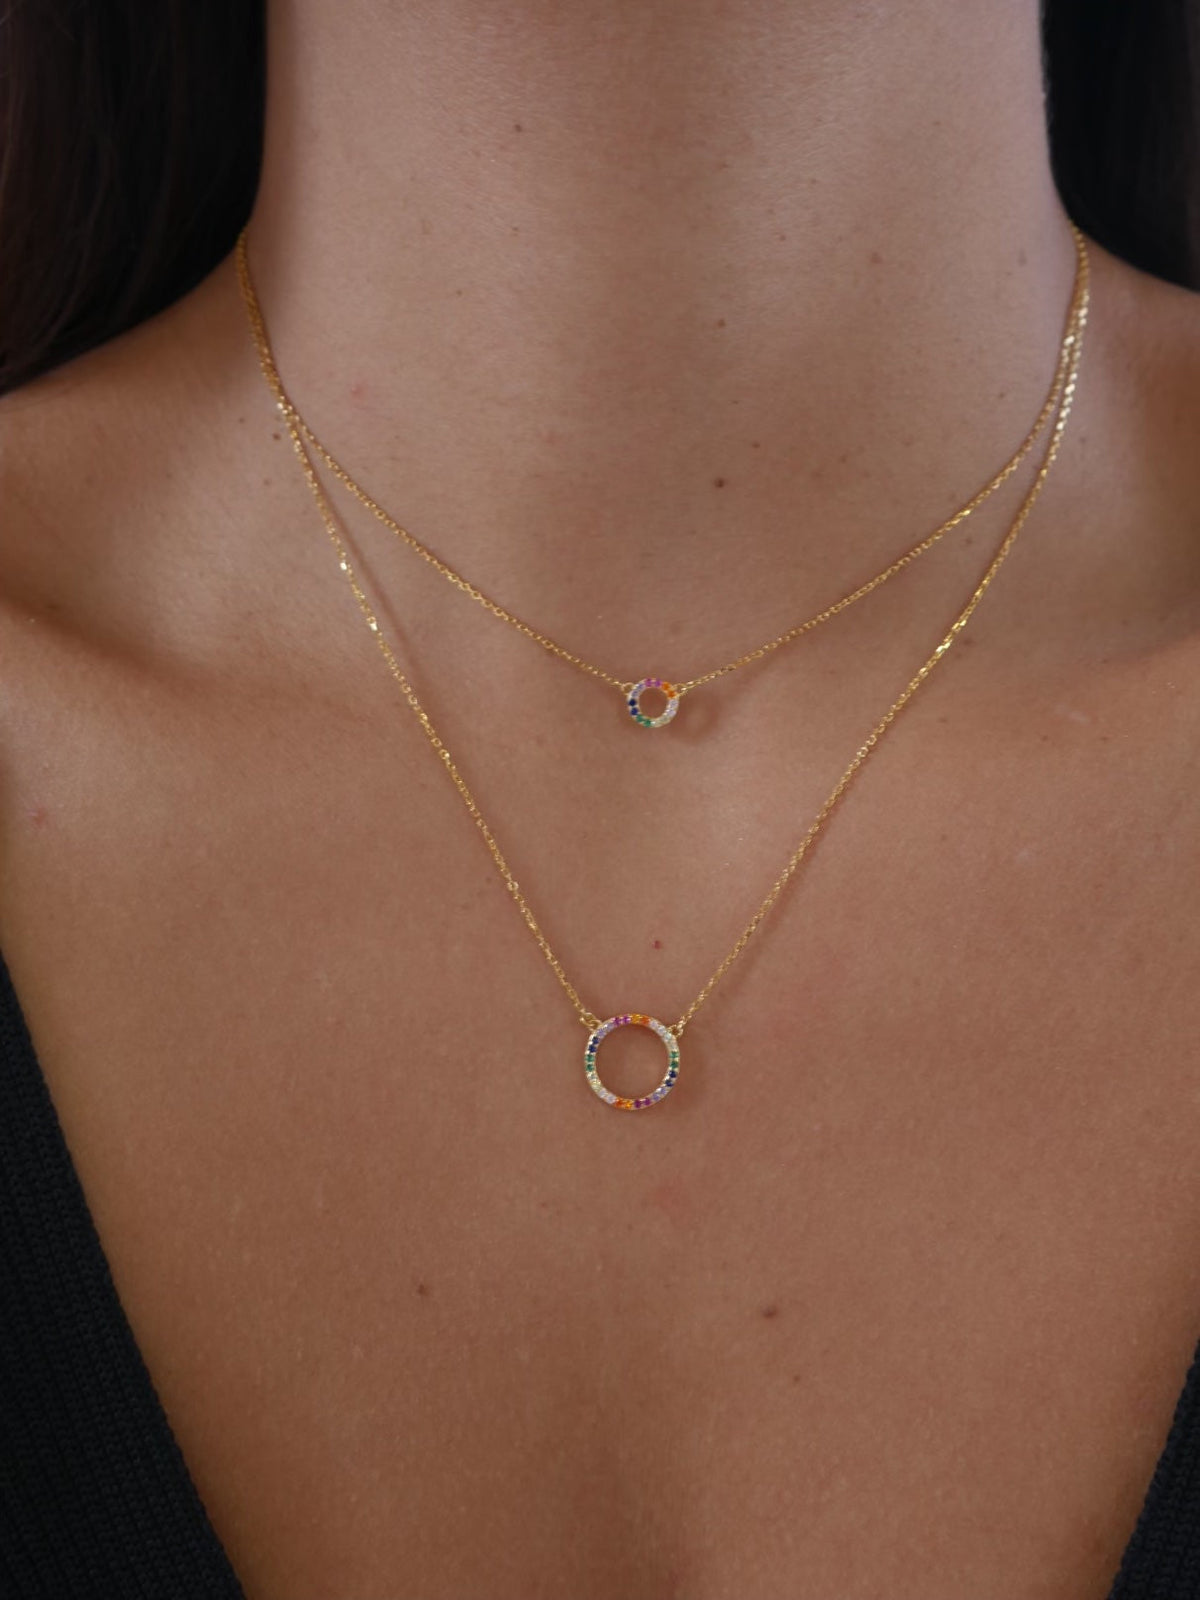 Circle Layered Necklace, 18K Gold Plated .925 Sterling Silver Diamond CZ 2:1 Dainty Necklace